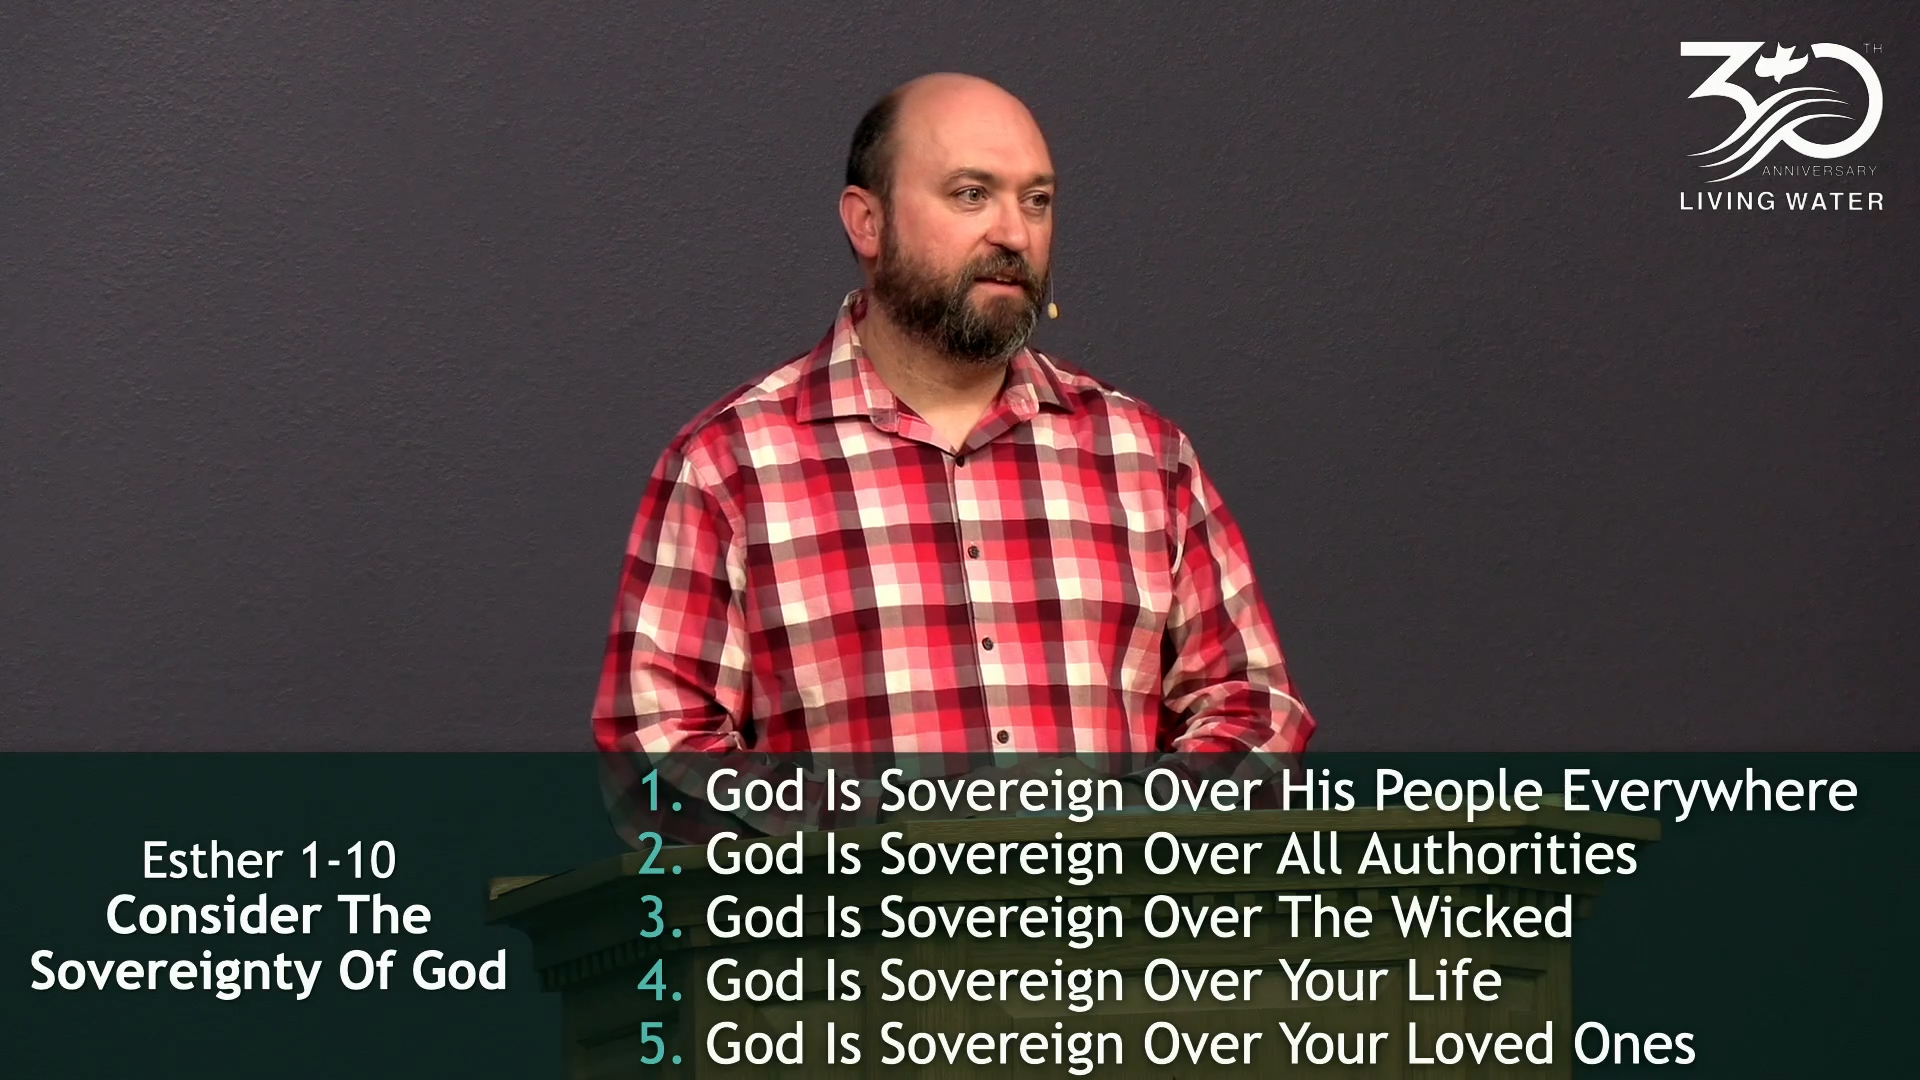 Pastor Jerry Simmons teaching Esther 1-10, Consider The Sovereignty Of God